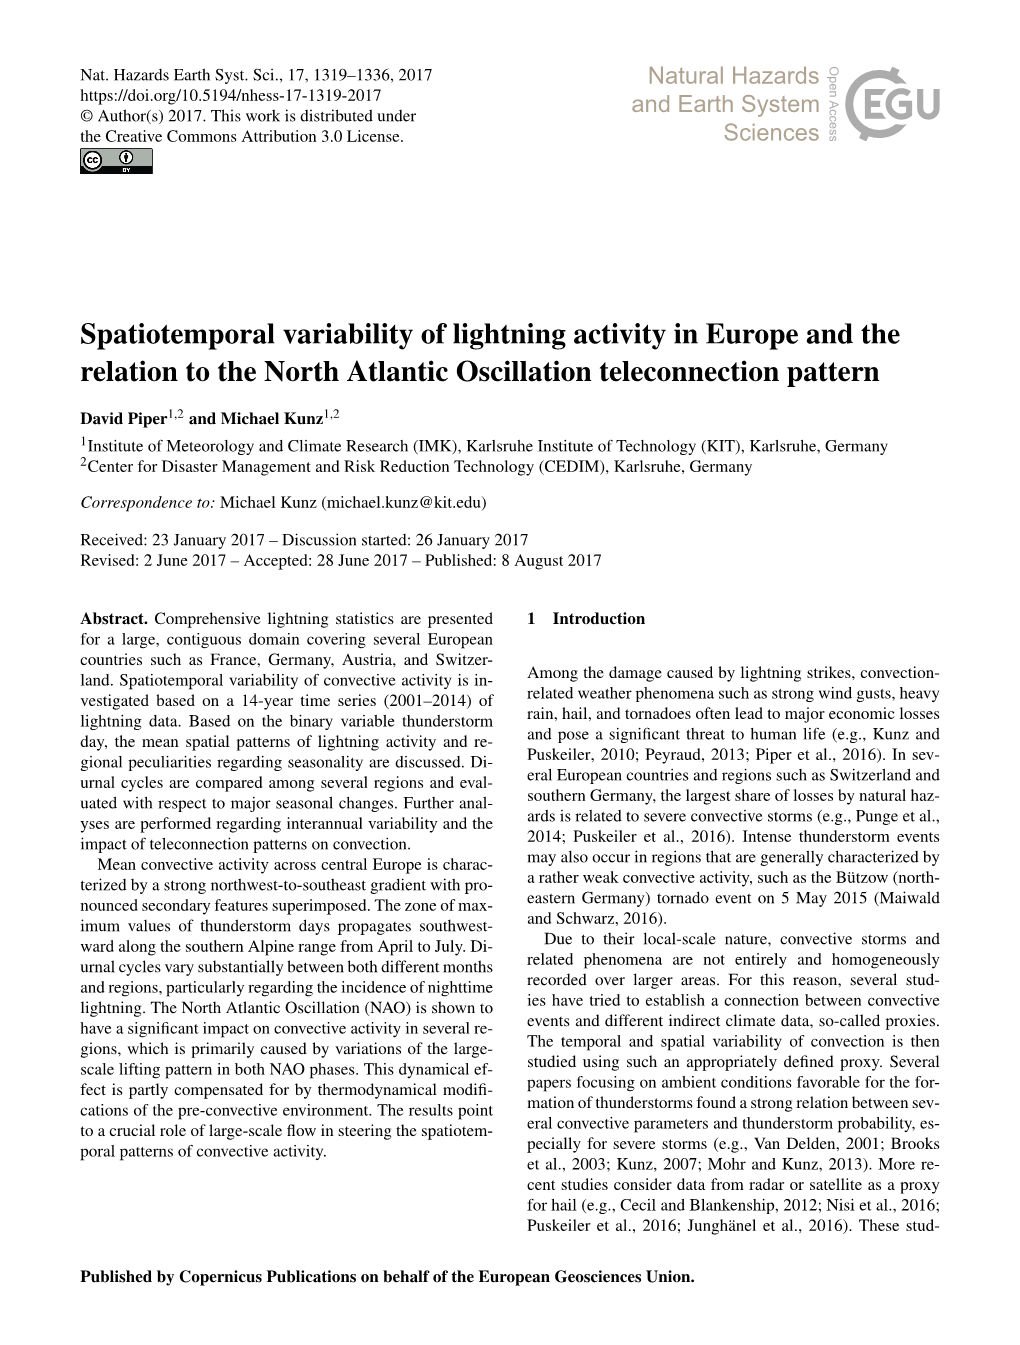 Spatiotemporal Variability of Lightning Activity in Europe and the Relation to the North Atlantic Oscillation Teleconnection Pattern